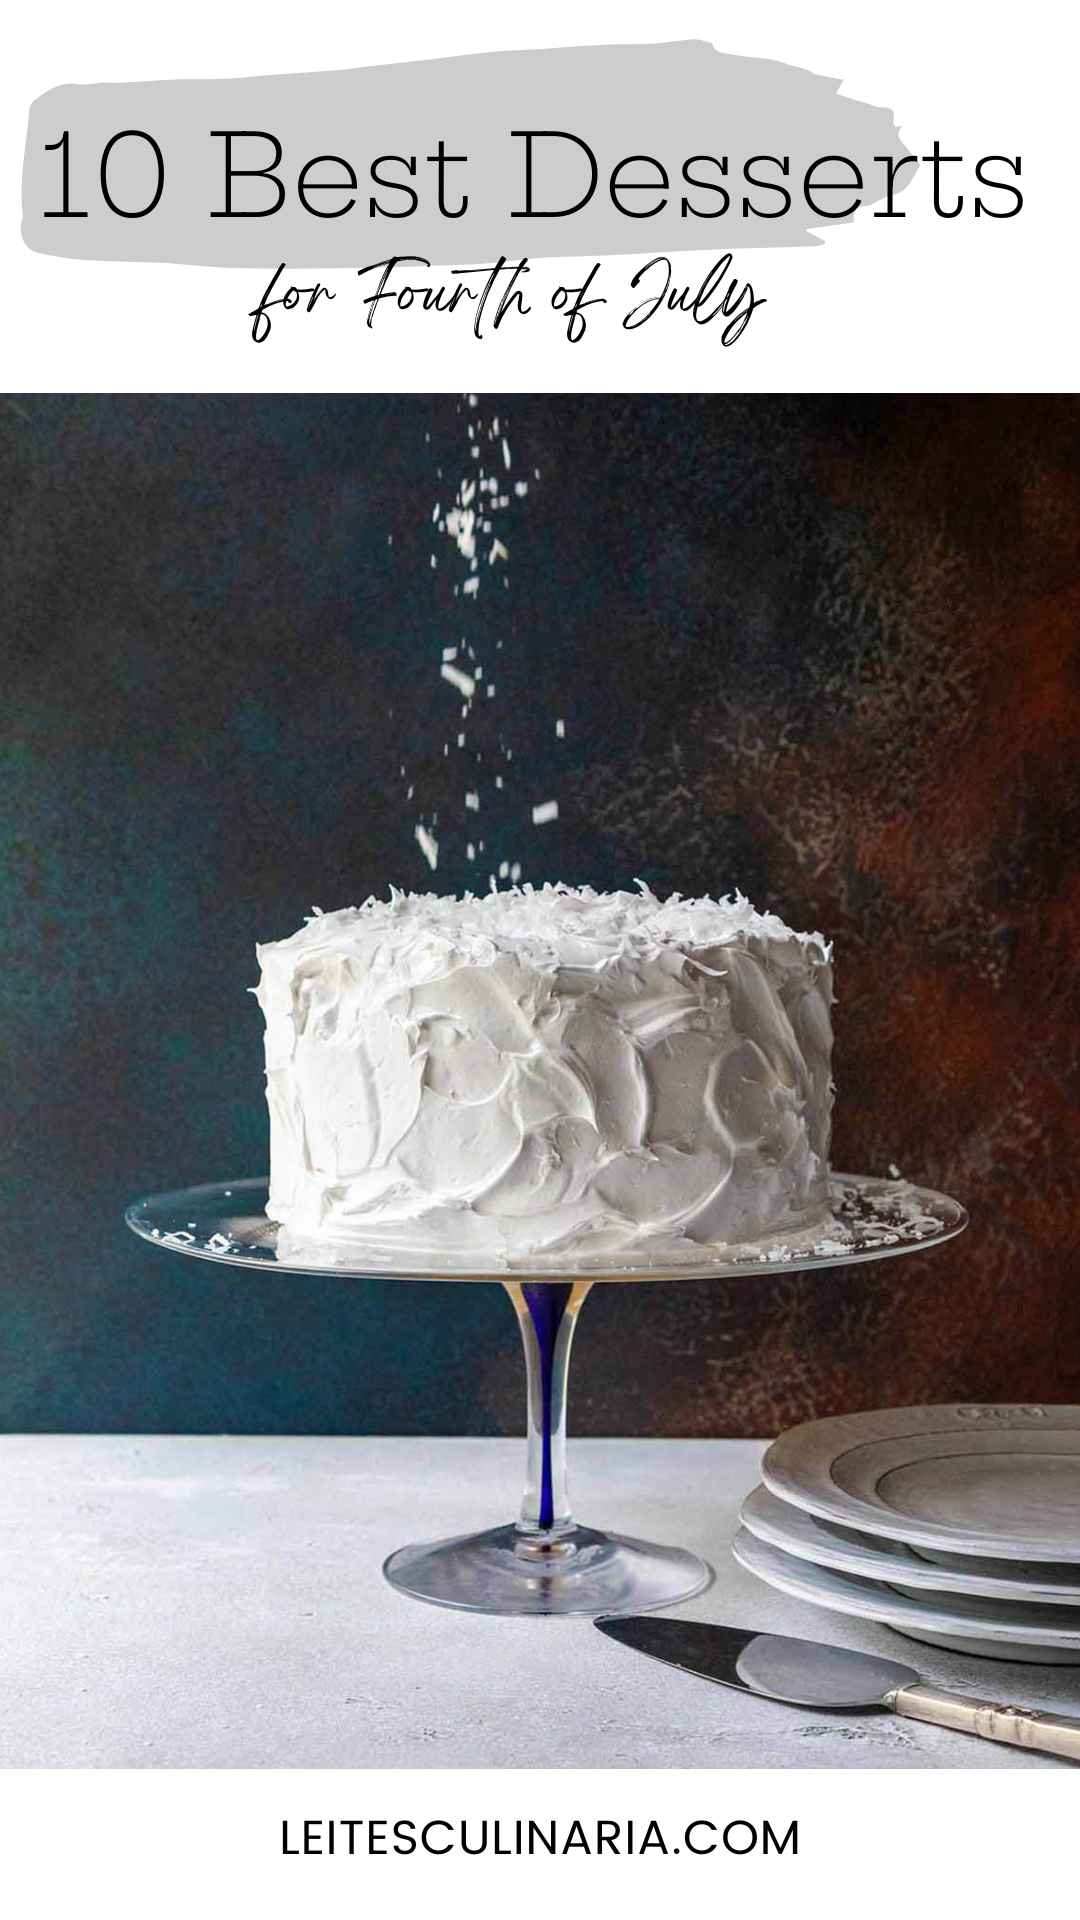 A cake covered in white frosting with coconut flakes falling onto it.